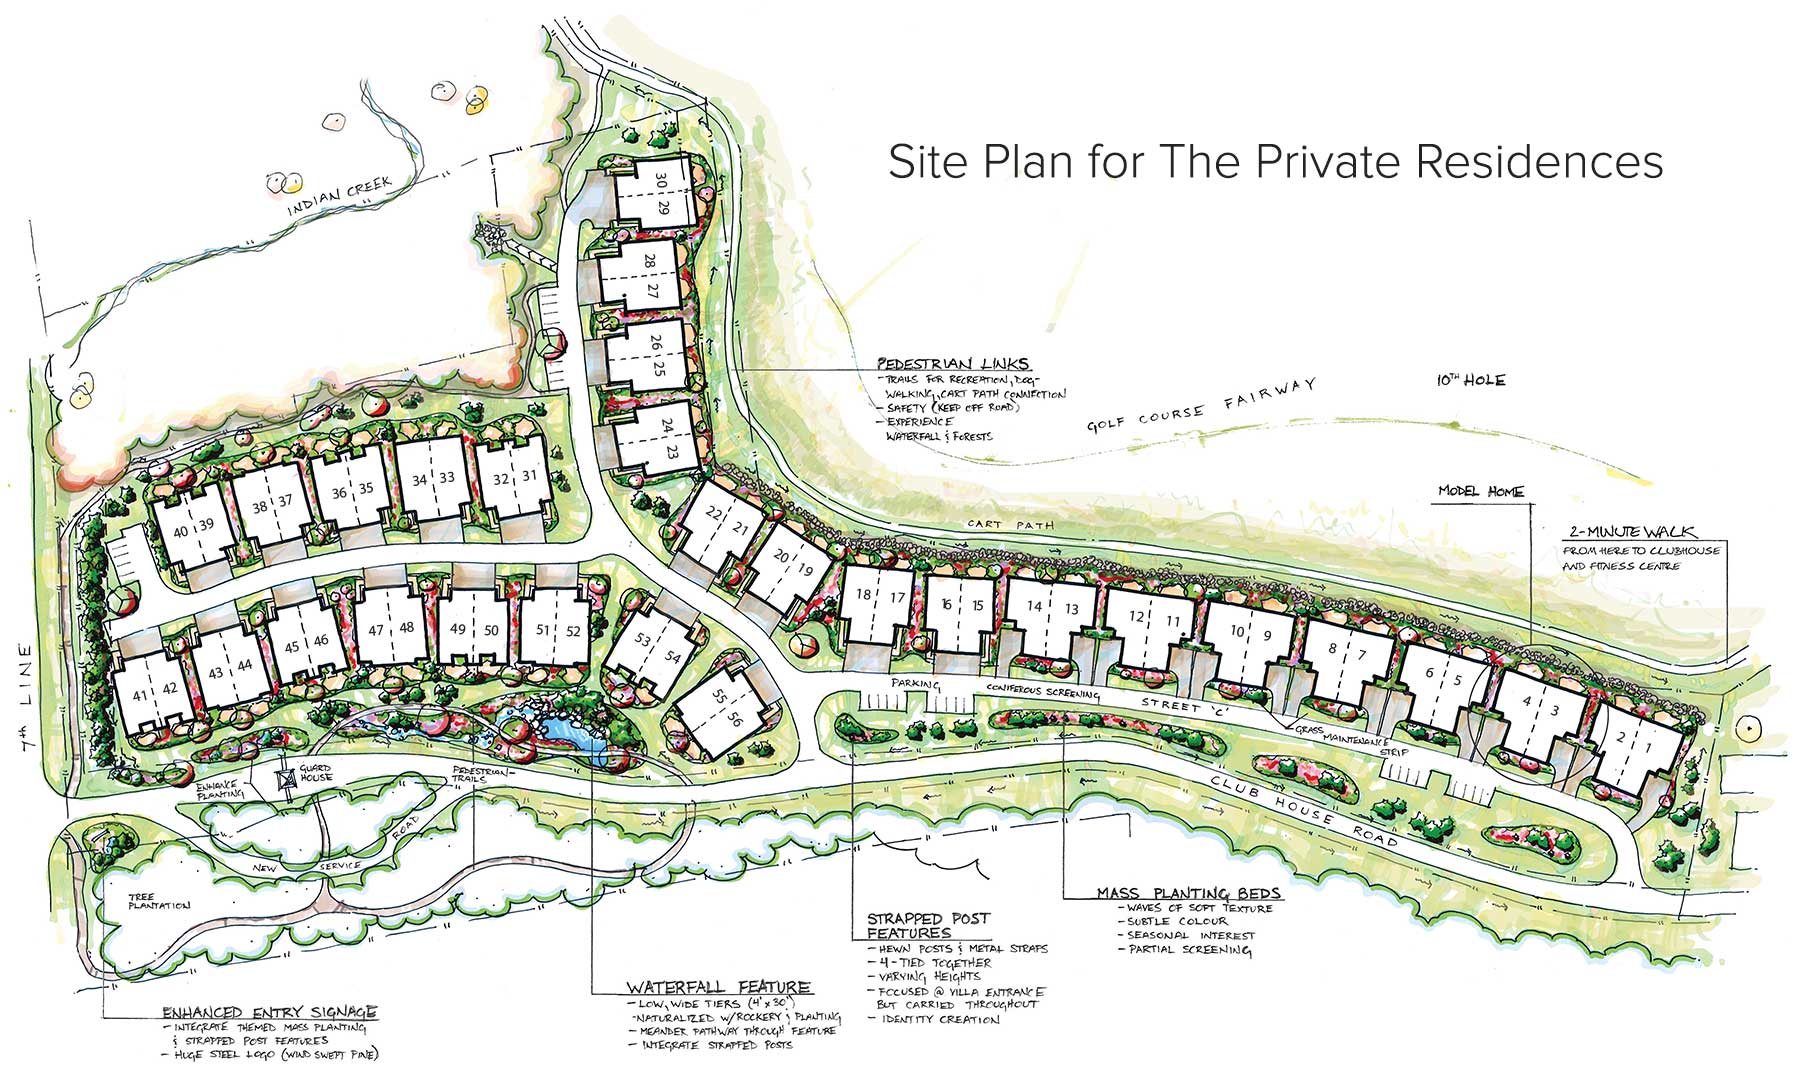 Site Plan for The Private Residences